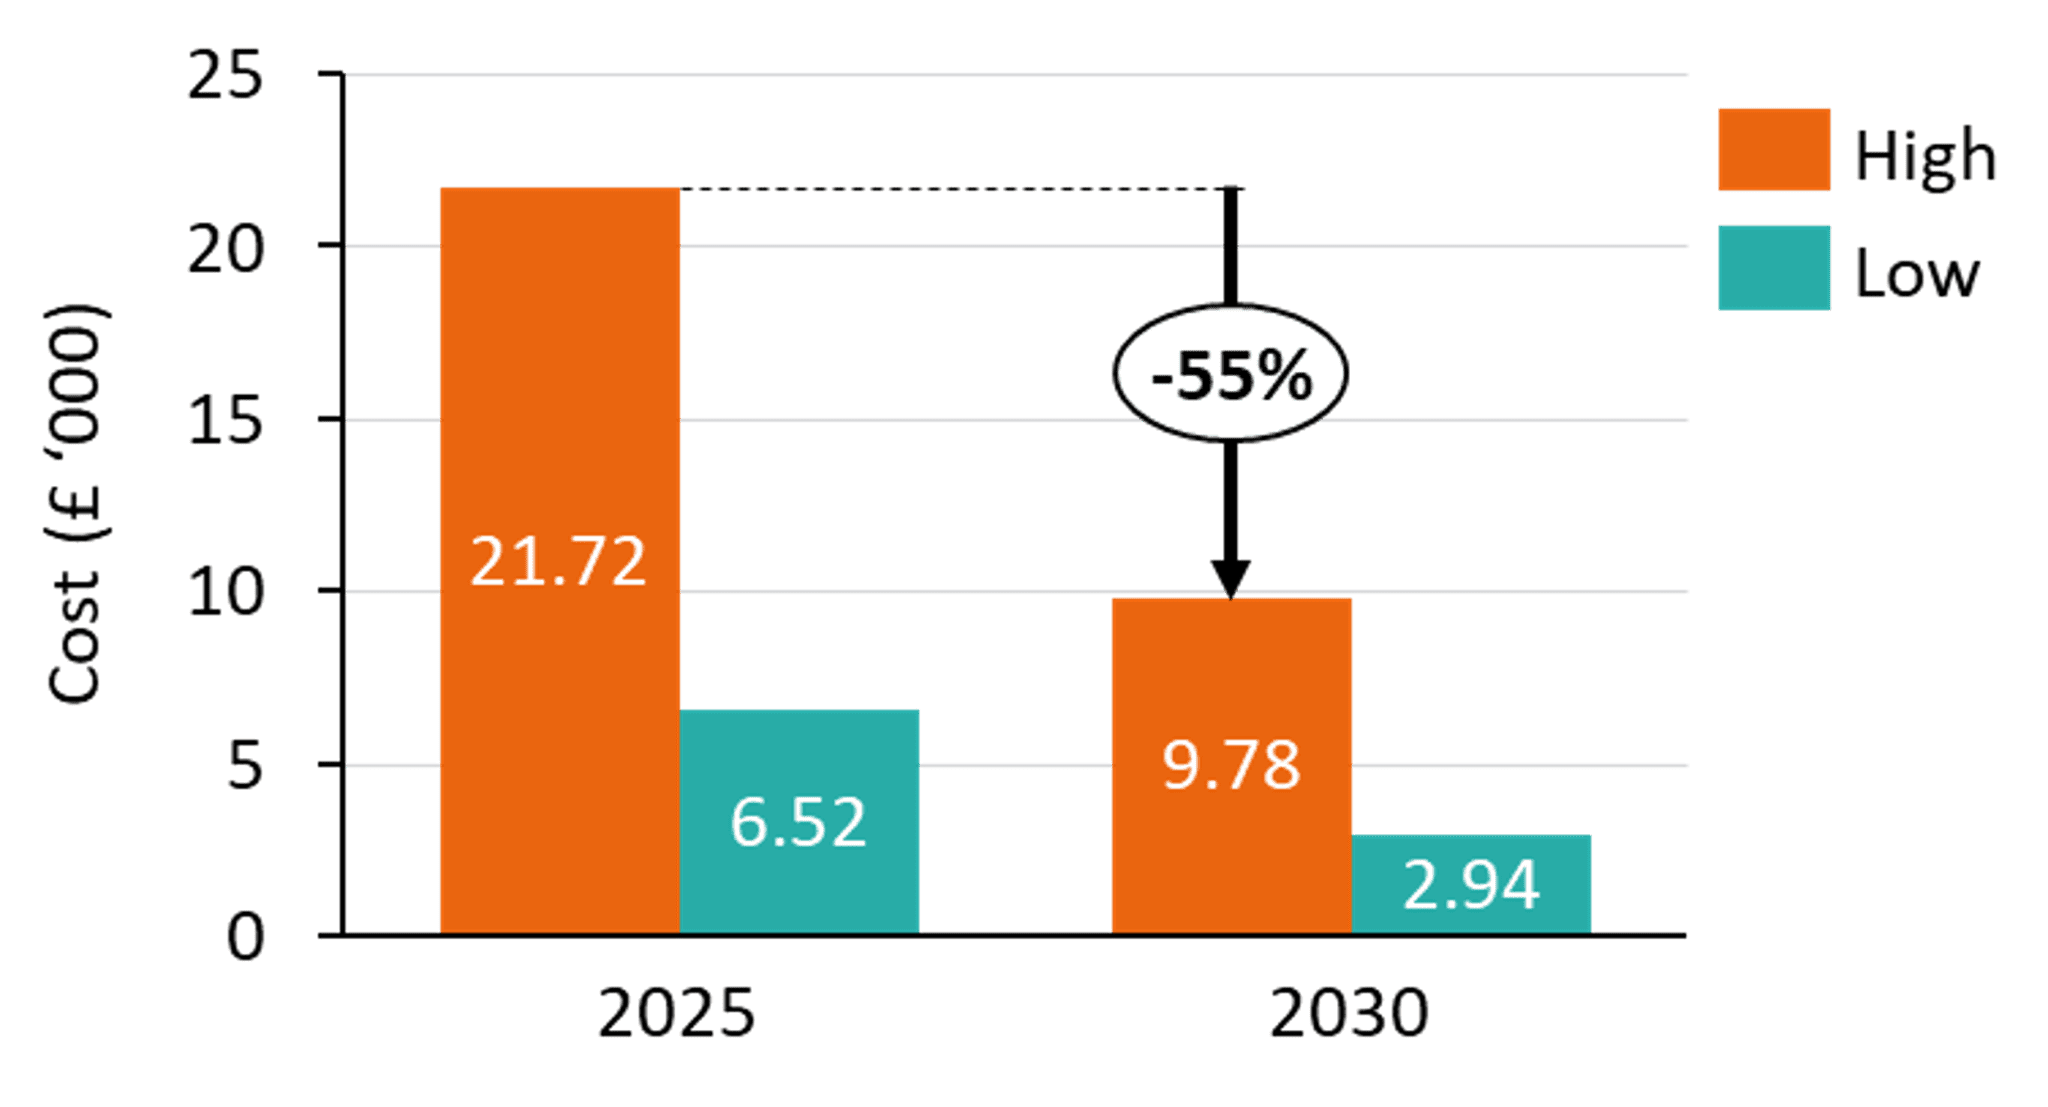 A chart showing the associated costs for hardware and installations for a 80 kW AC charger in 2025 and 2030, respectively. The costs are given in terms the thousands of pounds. In 2025, the high cost is £21,720 and the low cost is £6,520. In 2030, the high cost is £9,780 and the low cost is £2,940. 